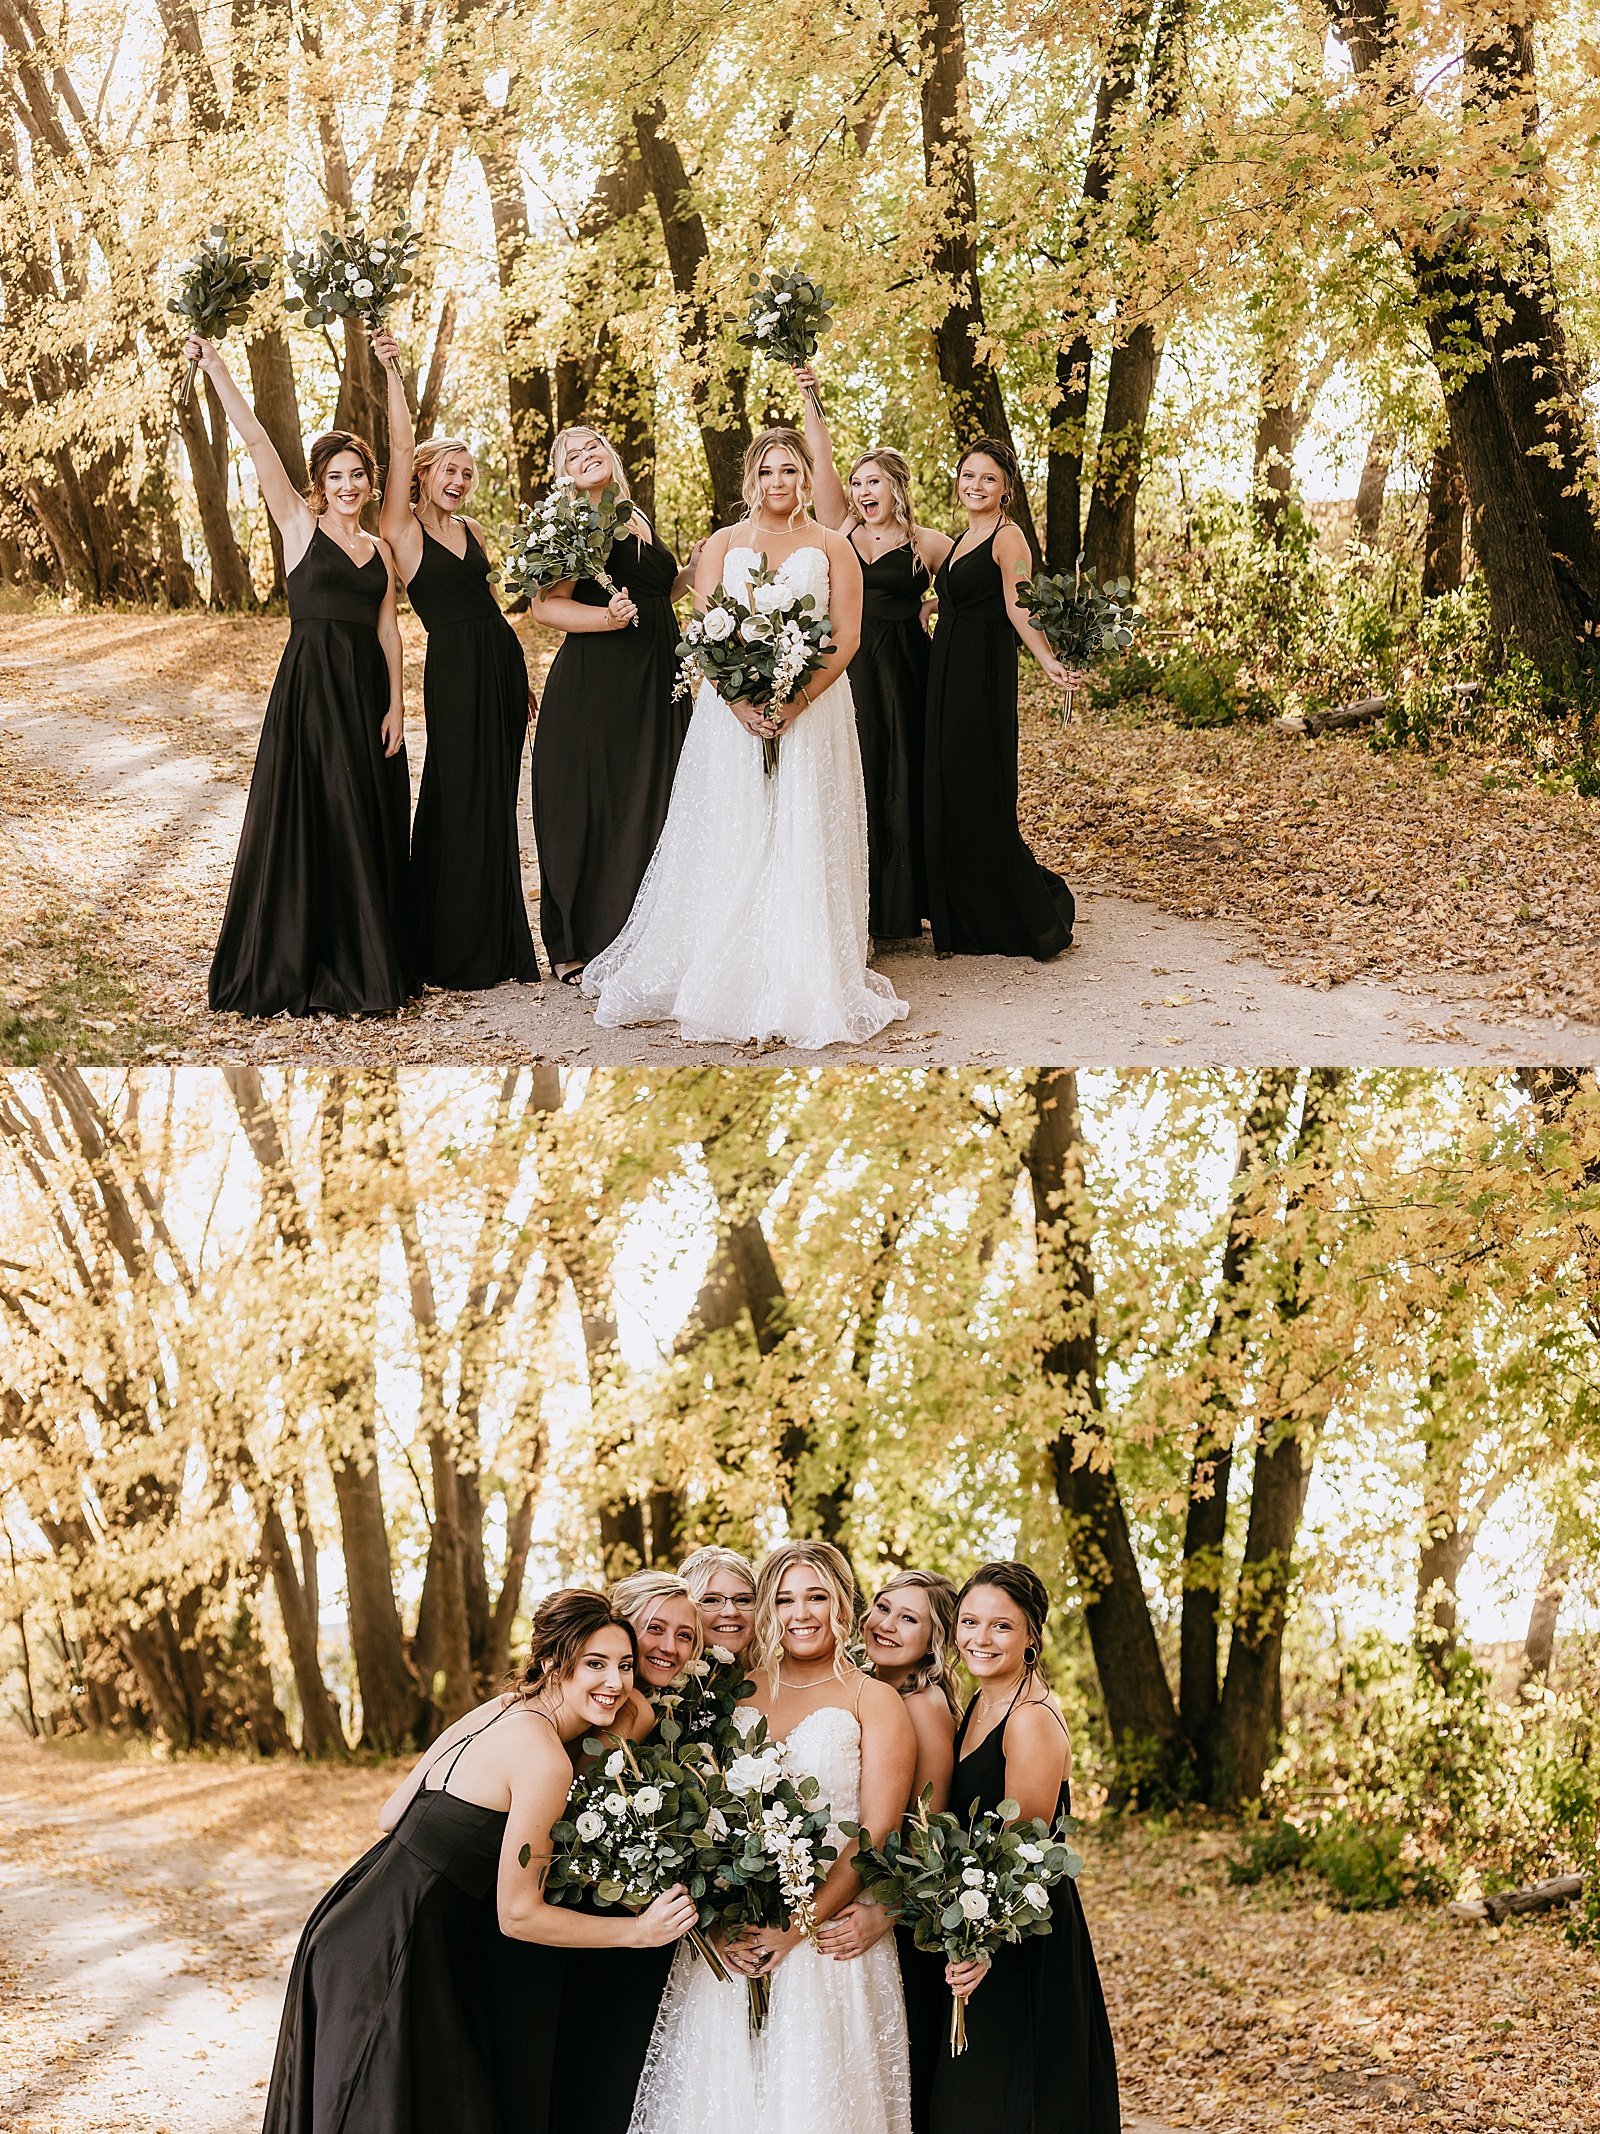  Bride and her bridesmaids in all black dresses in Fall foliage in Minneapolis  